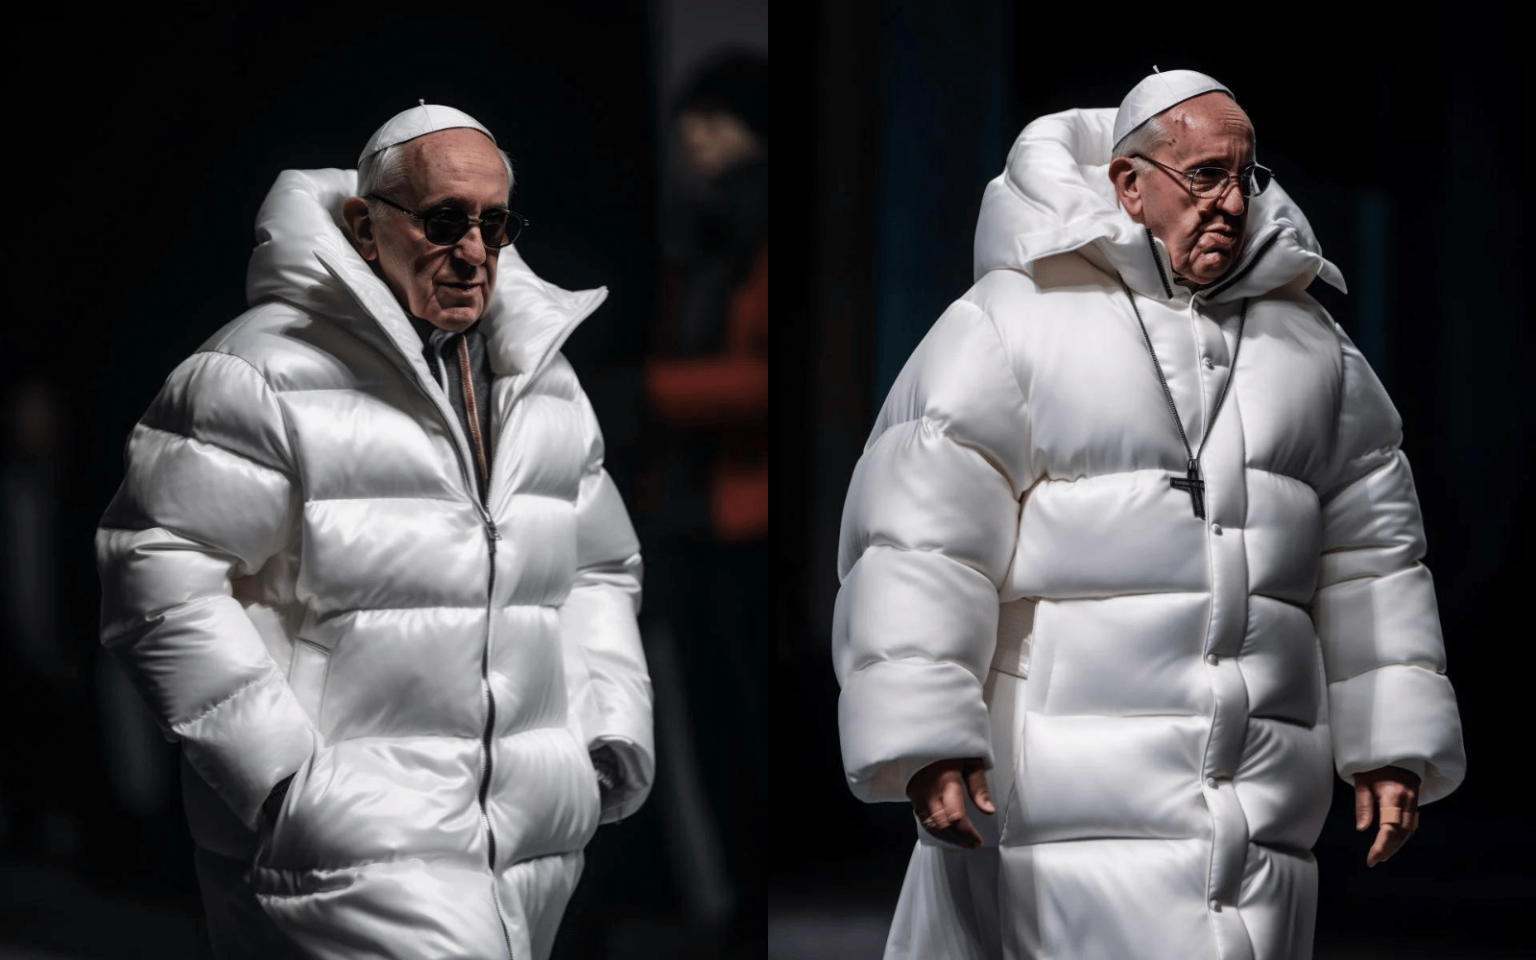 AI-generated image by Midjourney of Pope Francis wearing a Belenciaga coat